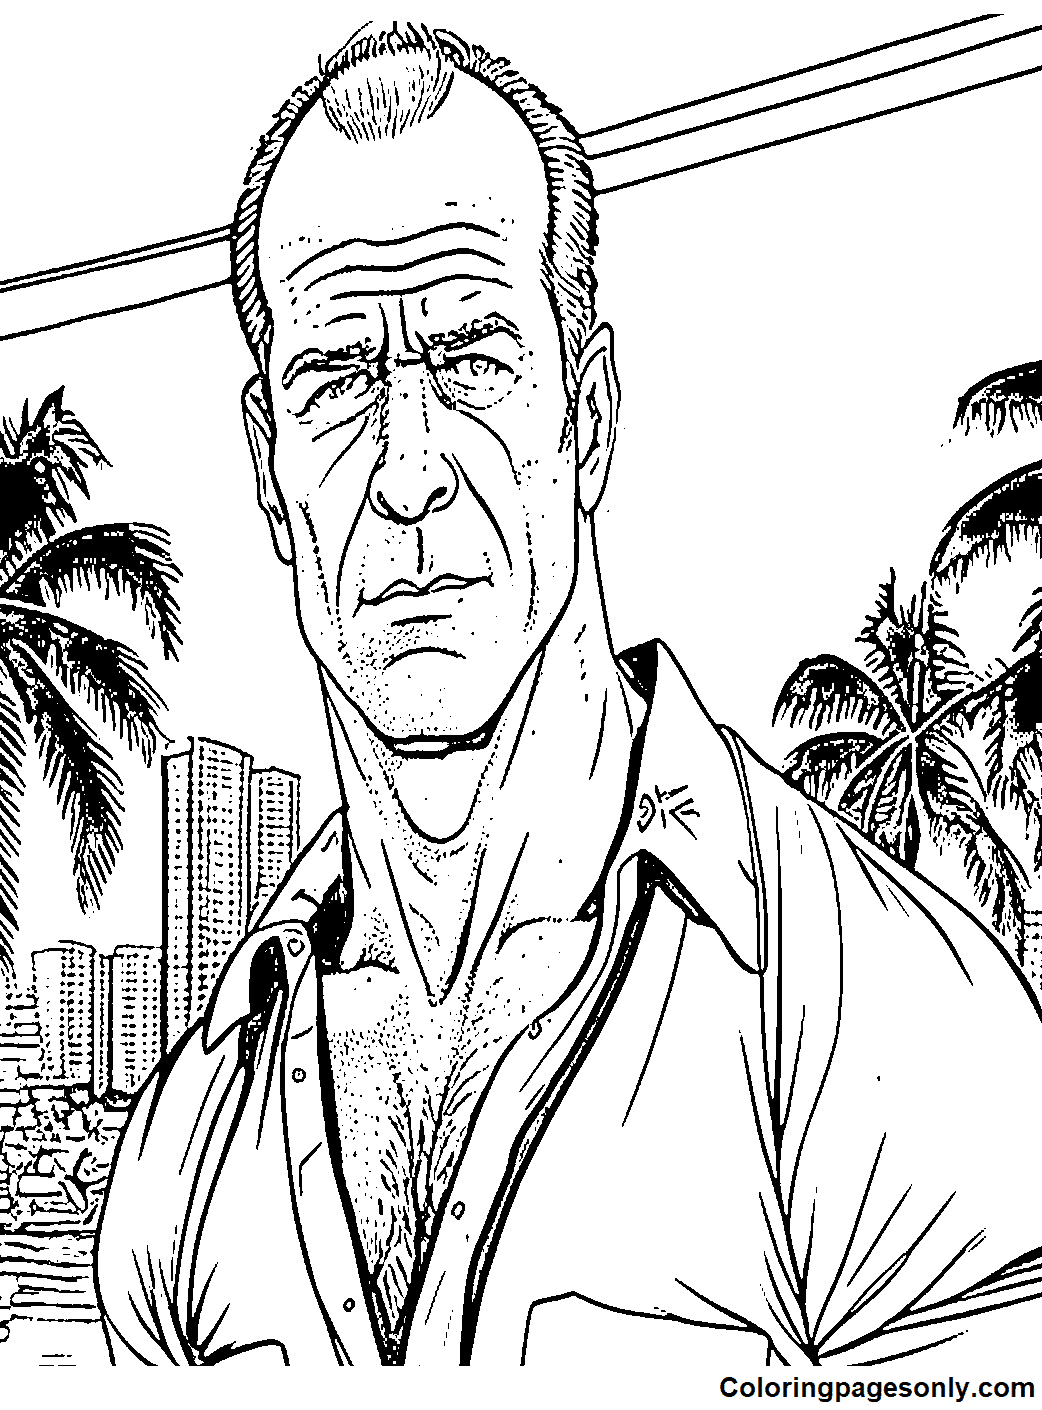 Bruce Willis as John McClane Coloring Pages